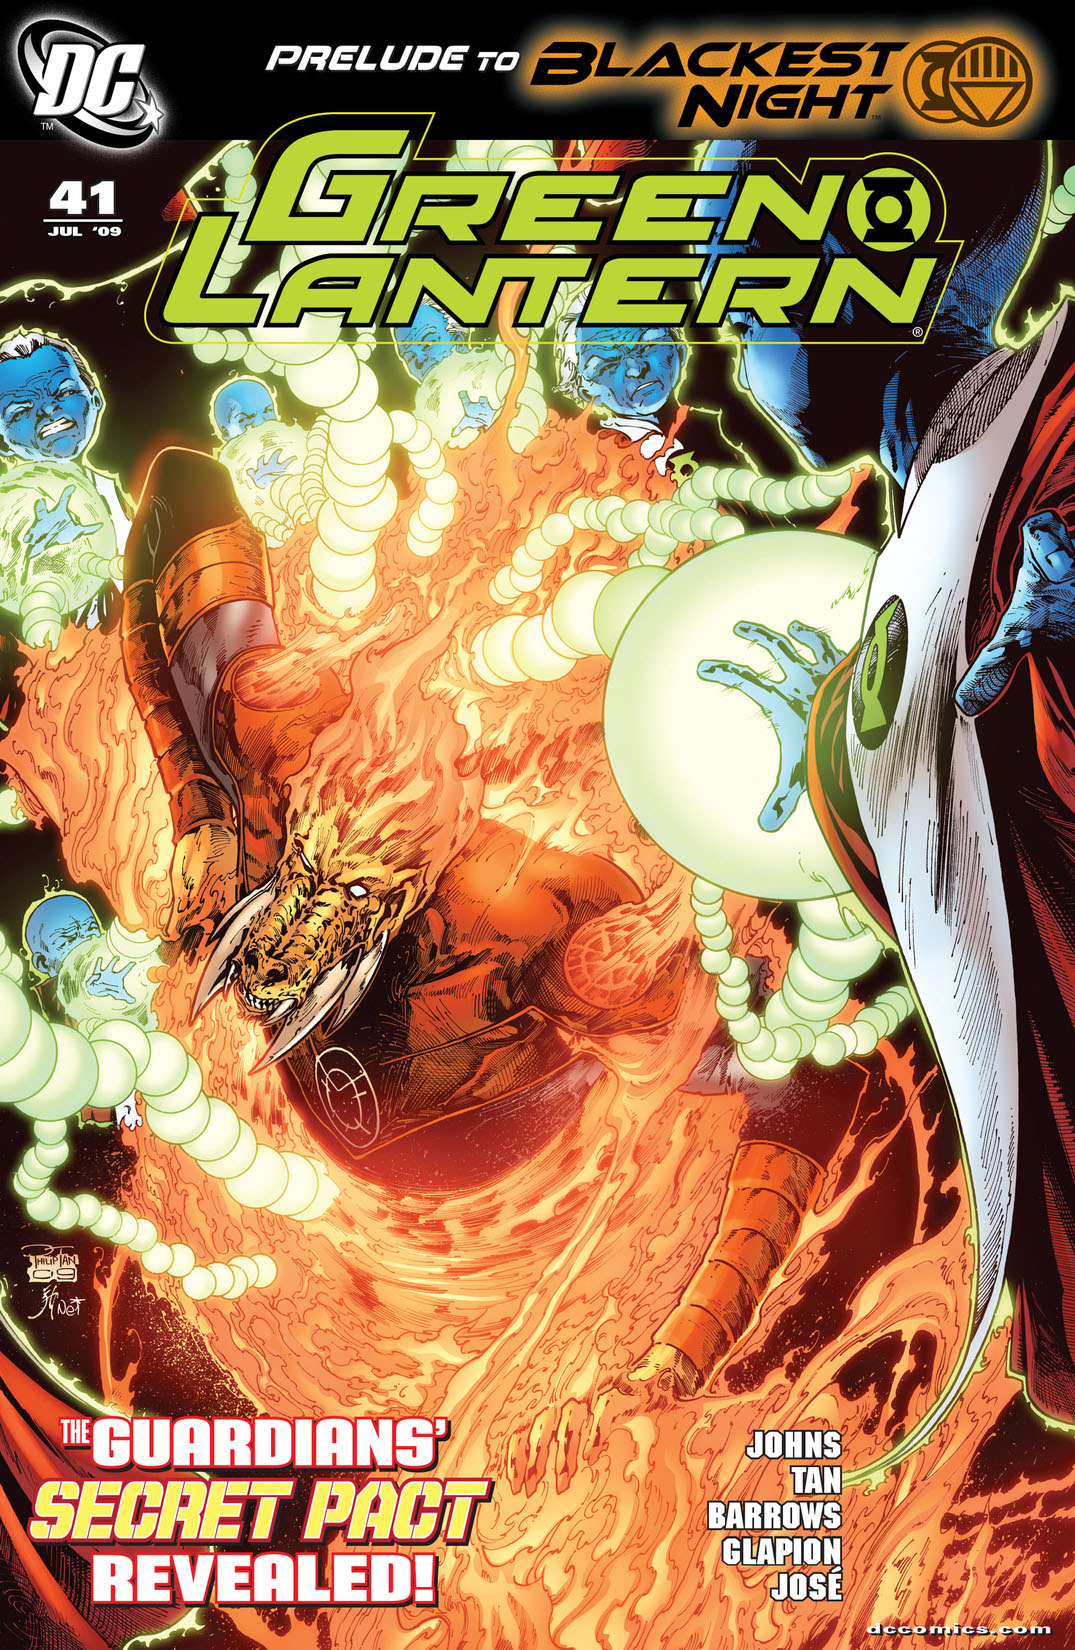 Green Lantern (2005-) #41 preview images